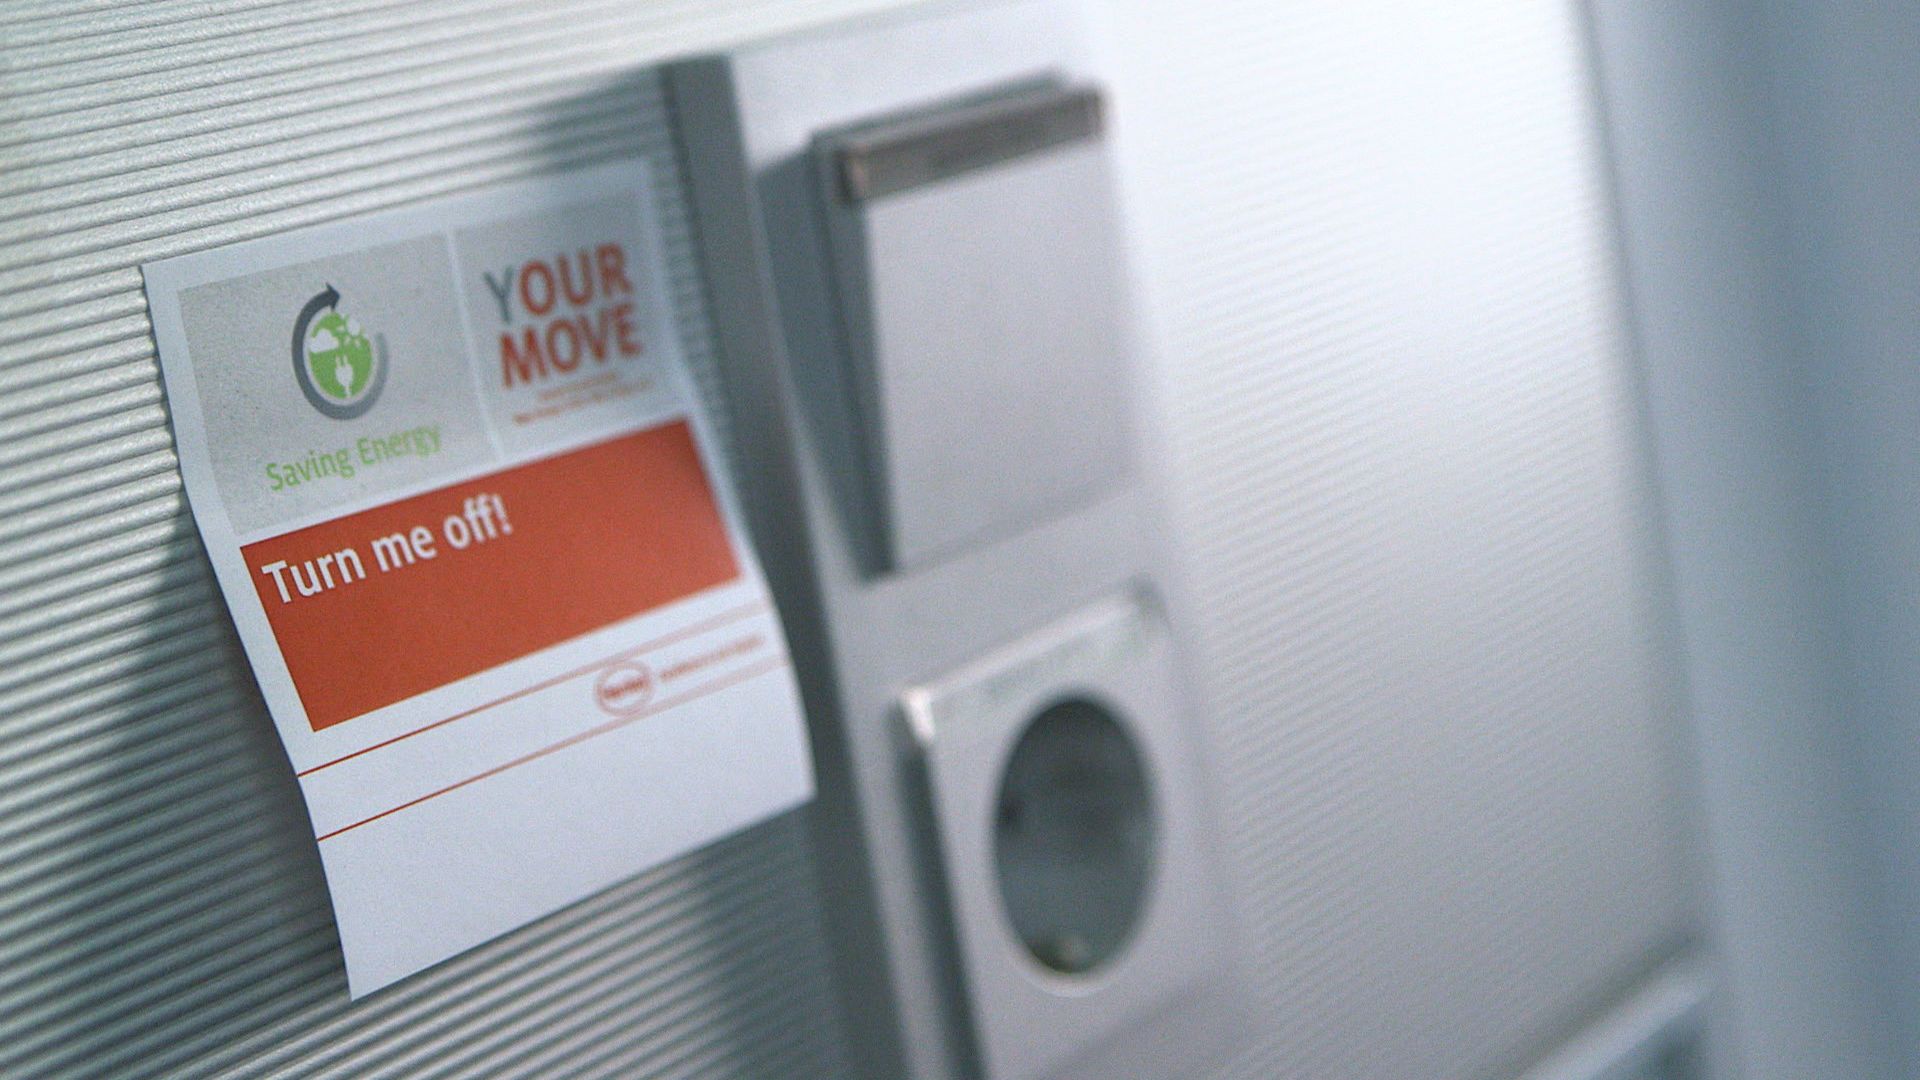 (Y)OUR MOVE campaign at Henkel